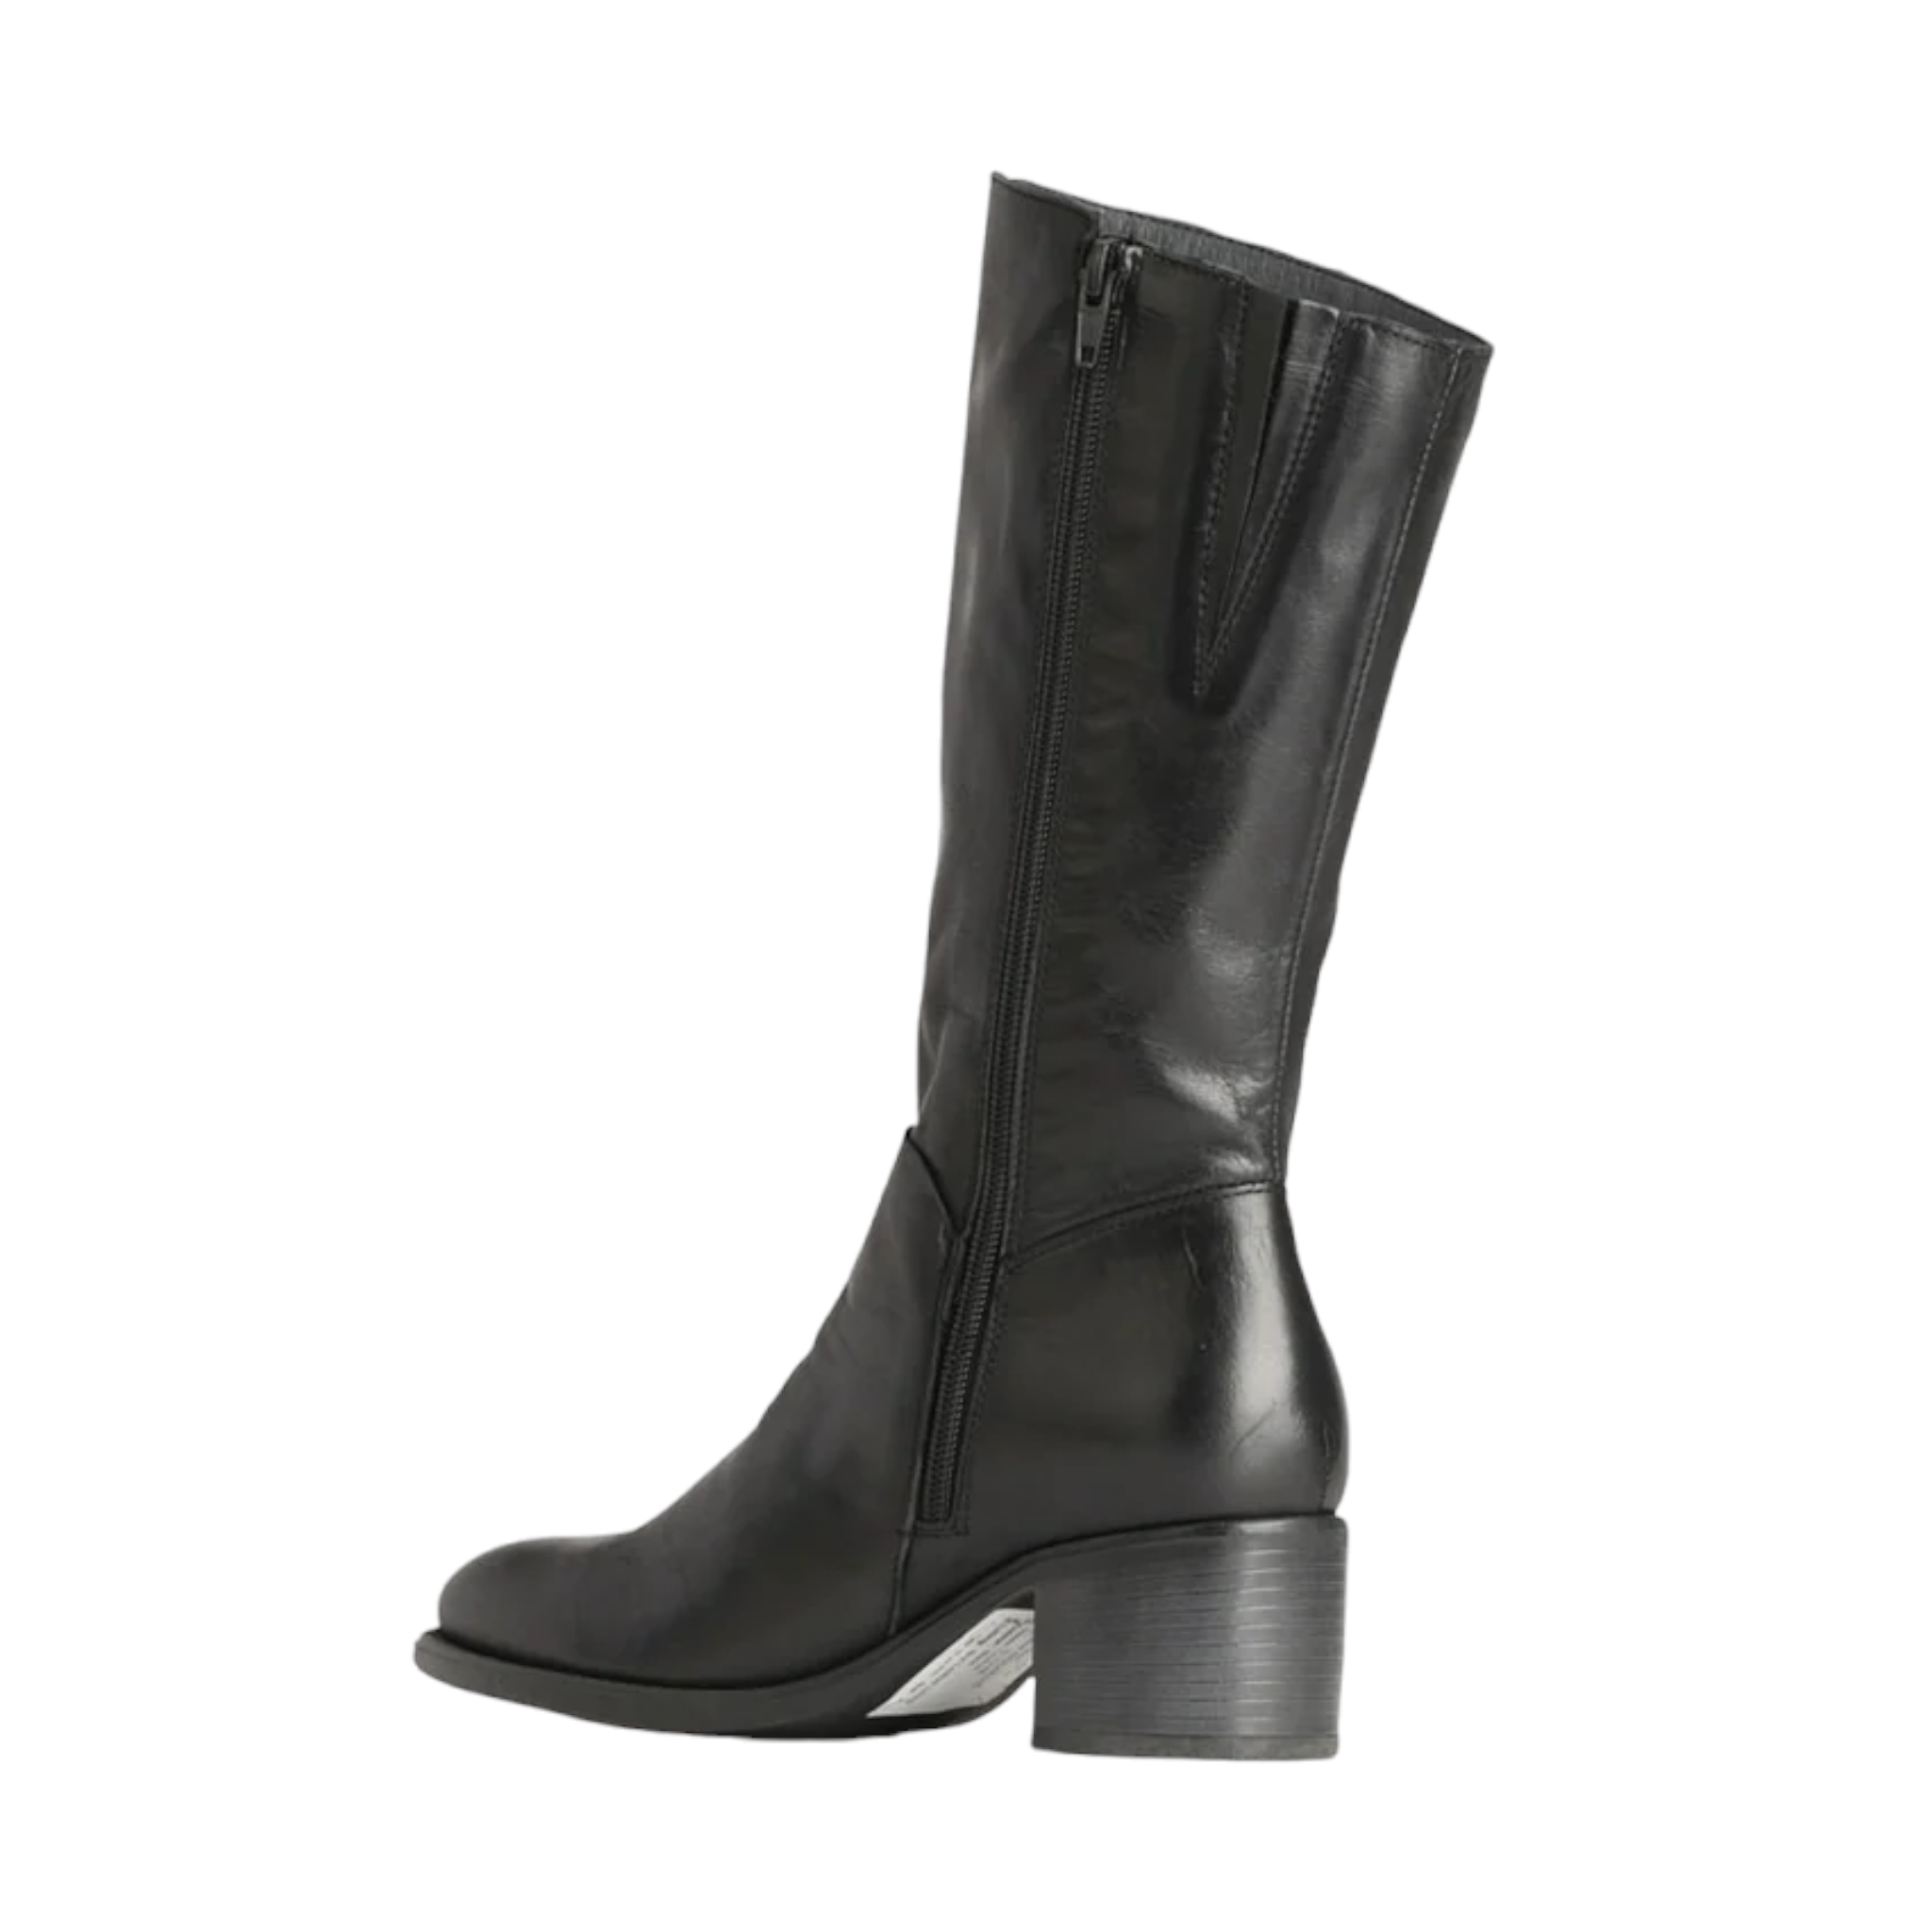 Shop Rochelle EOS - with shoe&amp;me - from EOS - Boots - Boot, Winter, Womens - [collection]